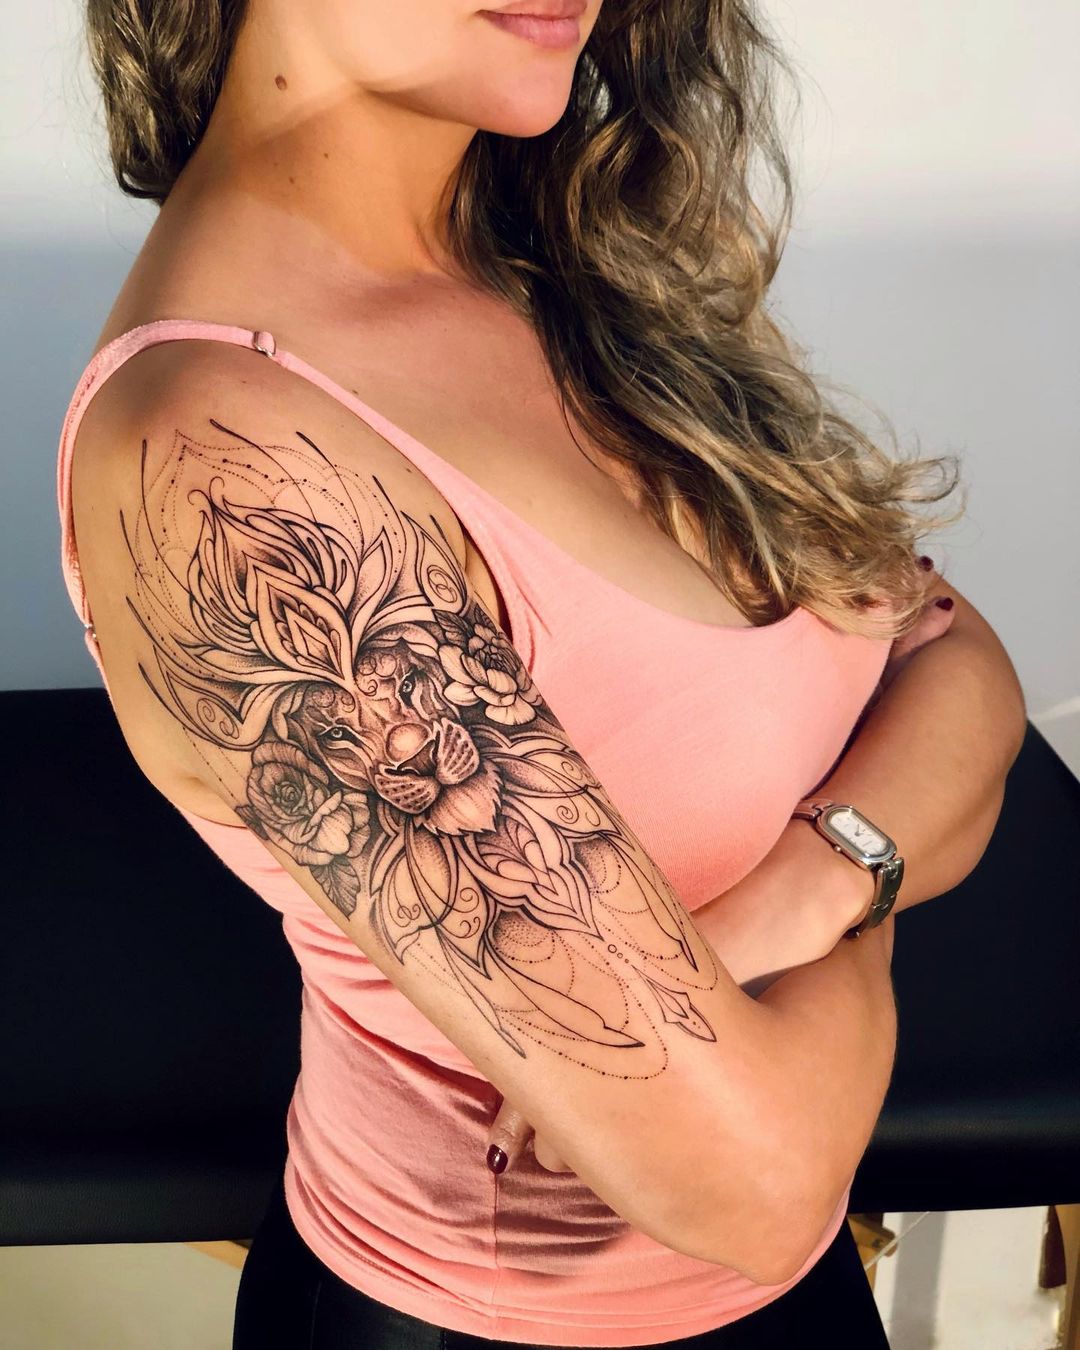 70+ Tattoo Designs For Women That'll Convince You To Get Inked! - India's Largest Digital Community of Women